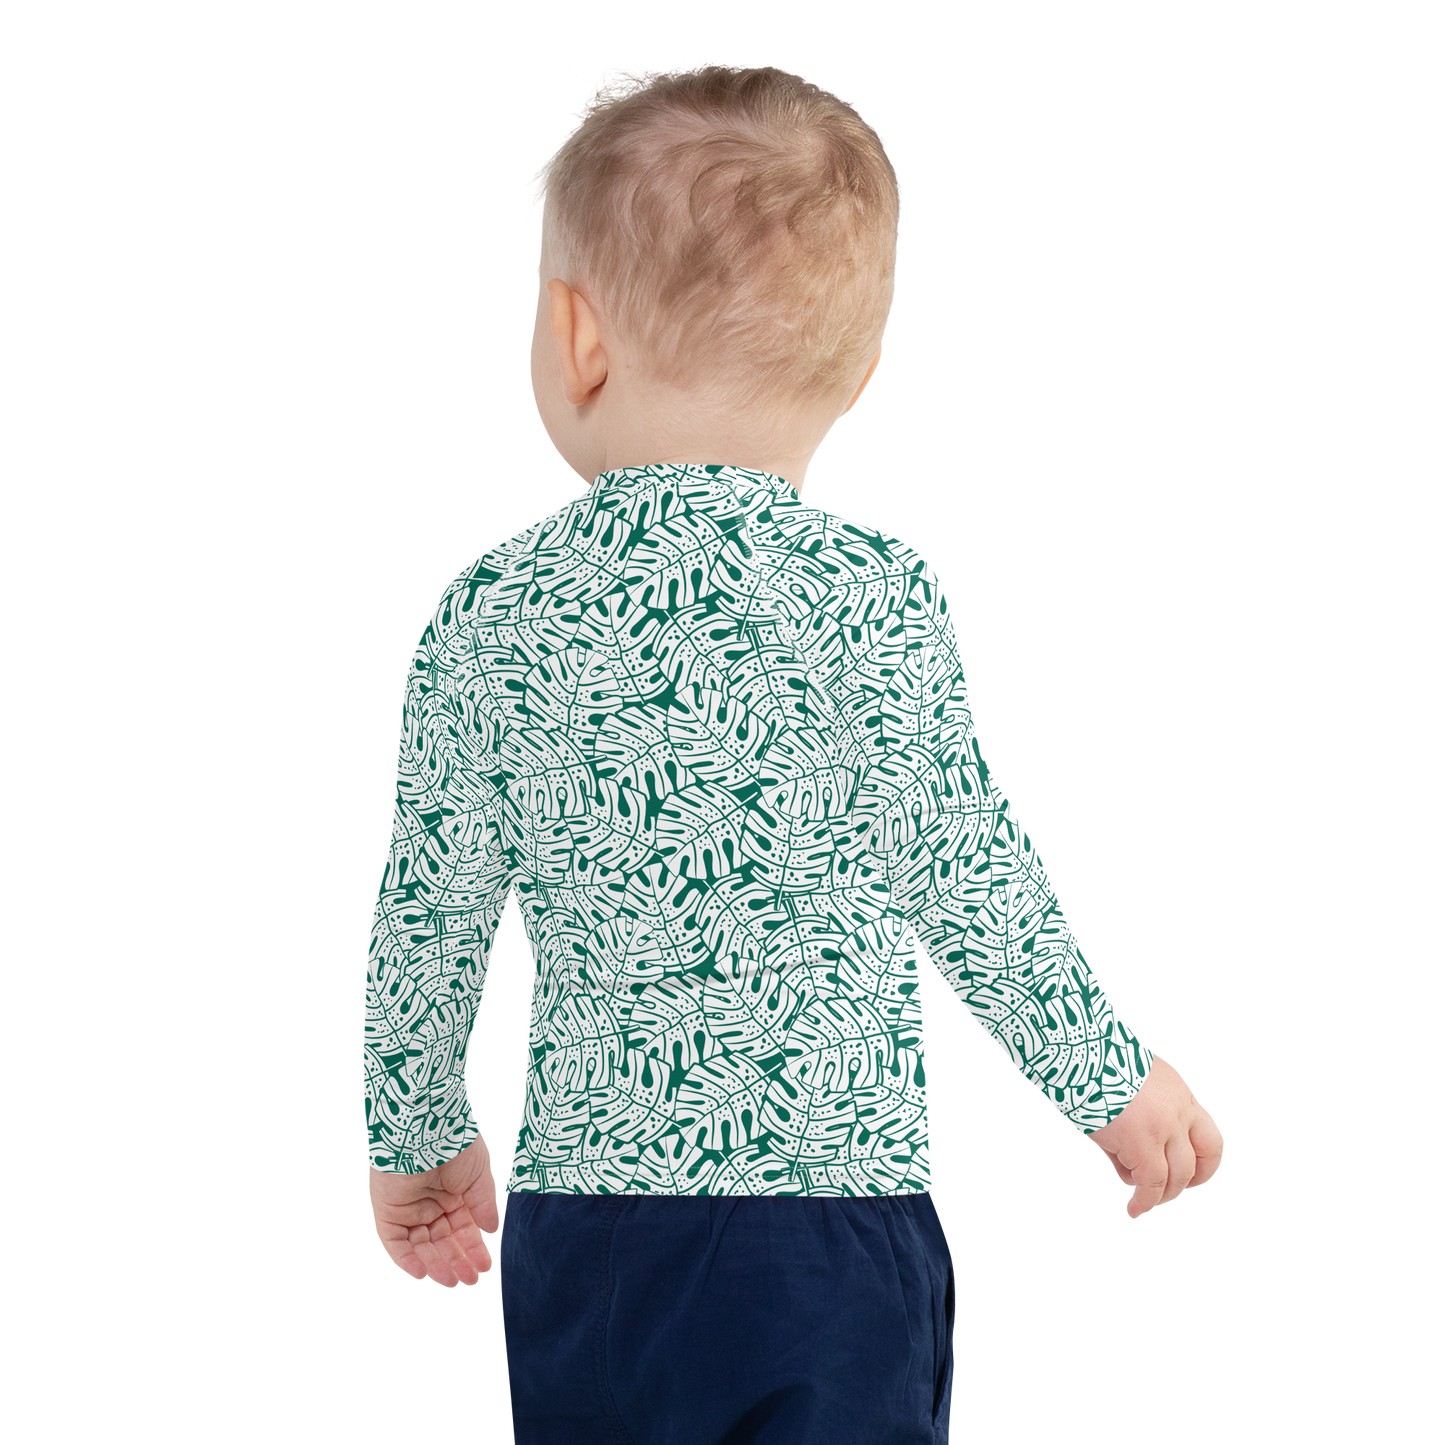 Colorful Fall Leaves | Seamless Patterns | All-Over Print Kids Rash Guard - #9